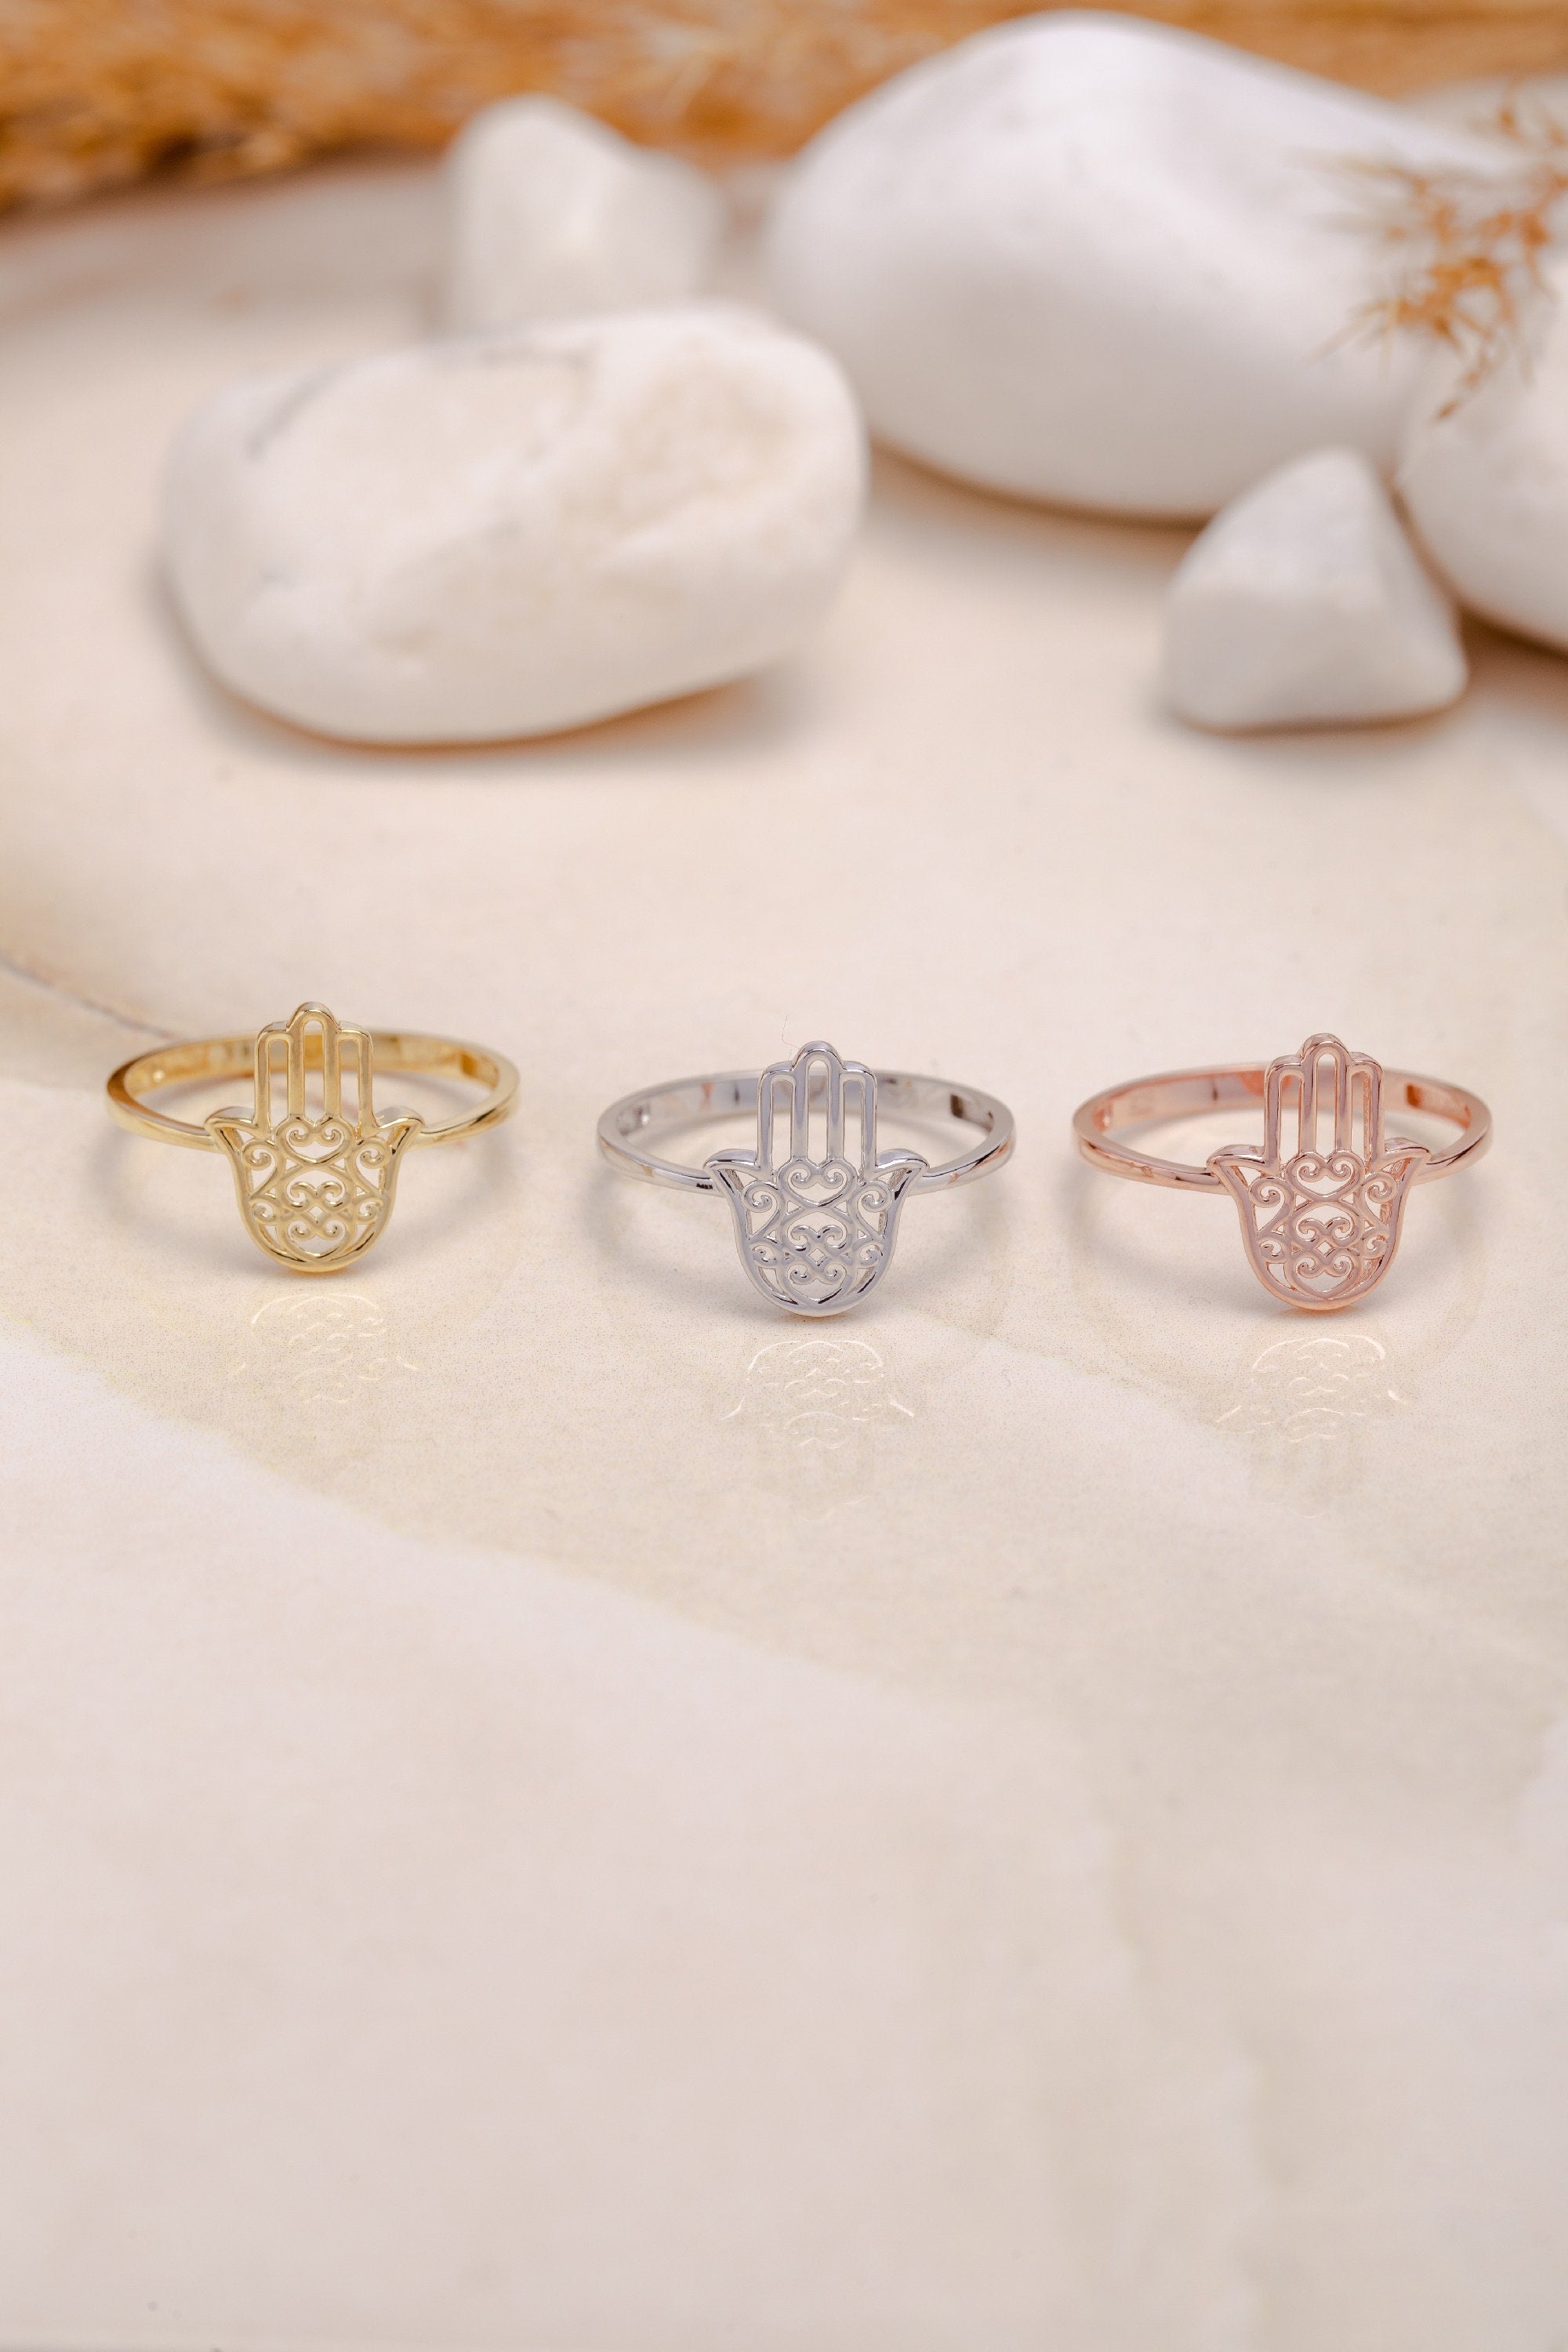 14K Solid Gold Hamsa Hand Ring, 925 Silver Hand of Fatima Ring, Statement Rings, Handmade Ring, Dainty Gold Ring, Gift For Mother Day